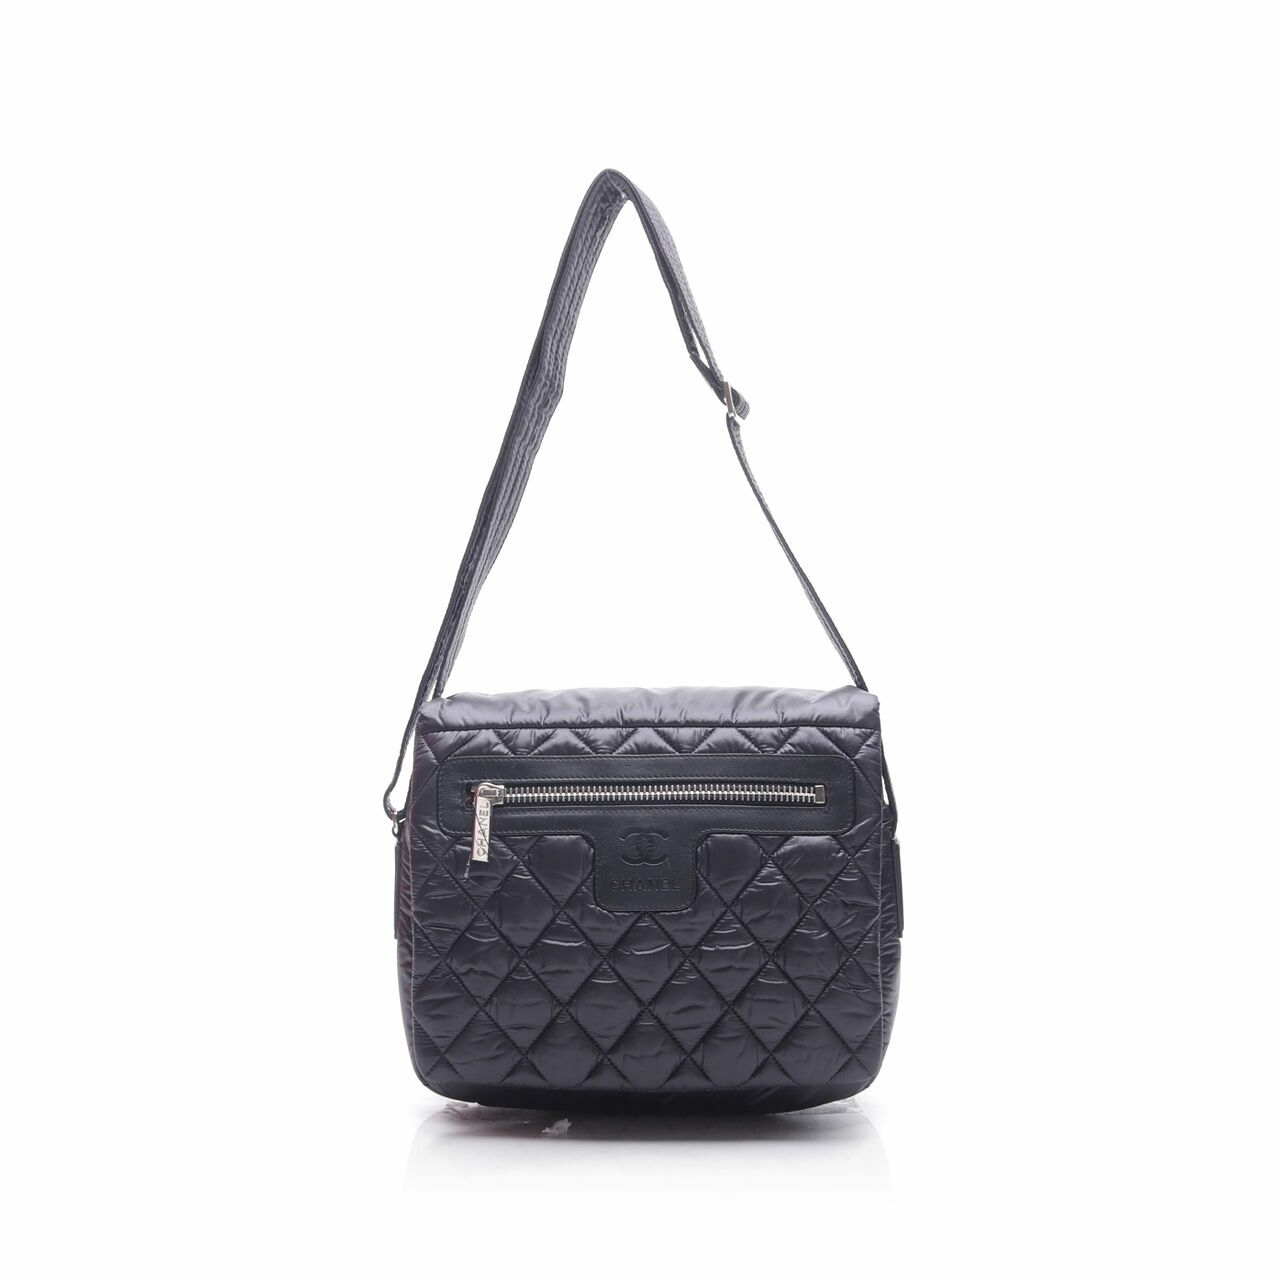  Chanel Black Quilted Nylon Coco Cocoon Small Messenger Slingbag